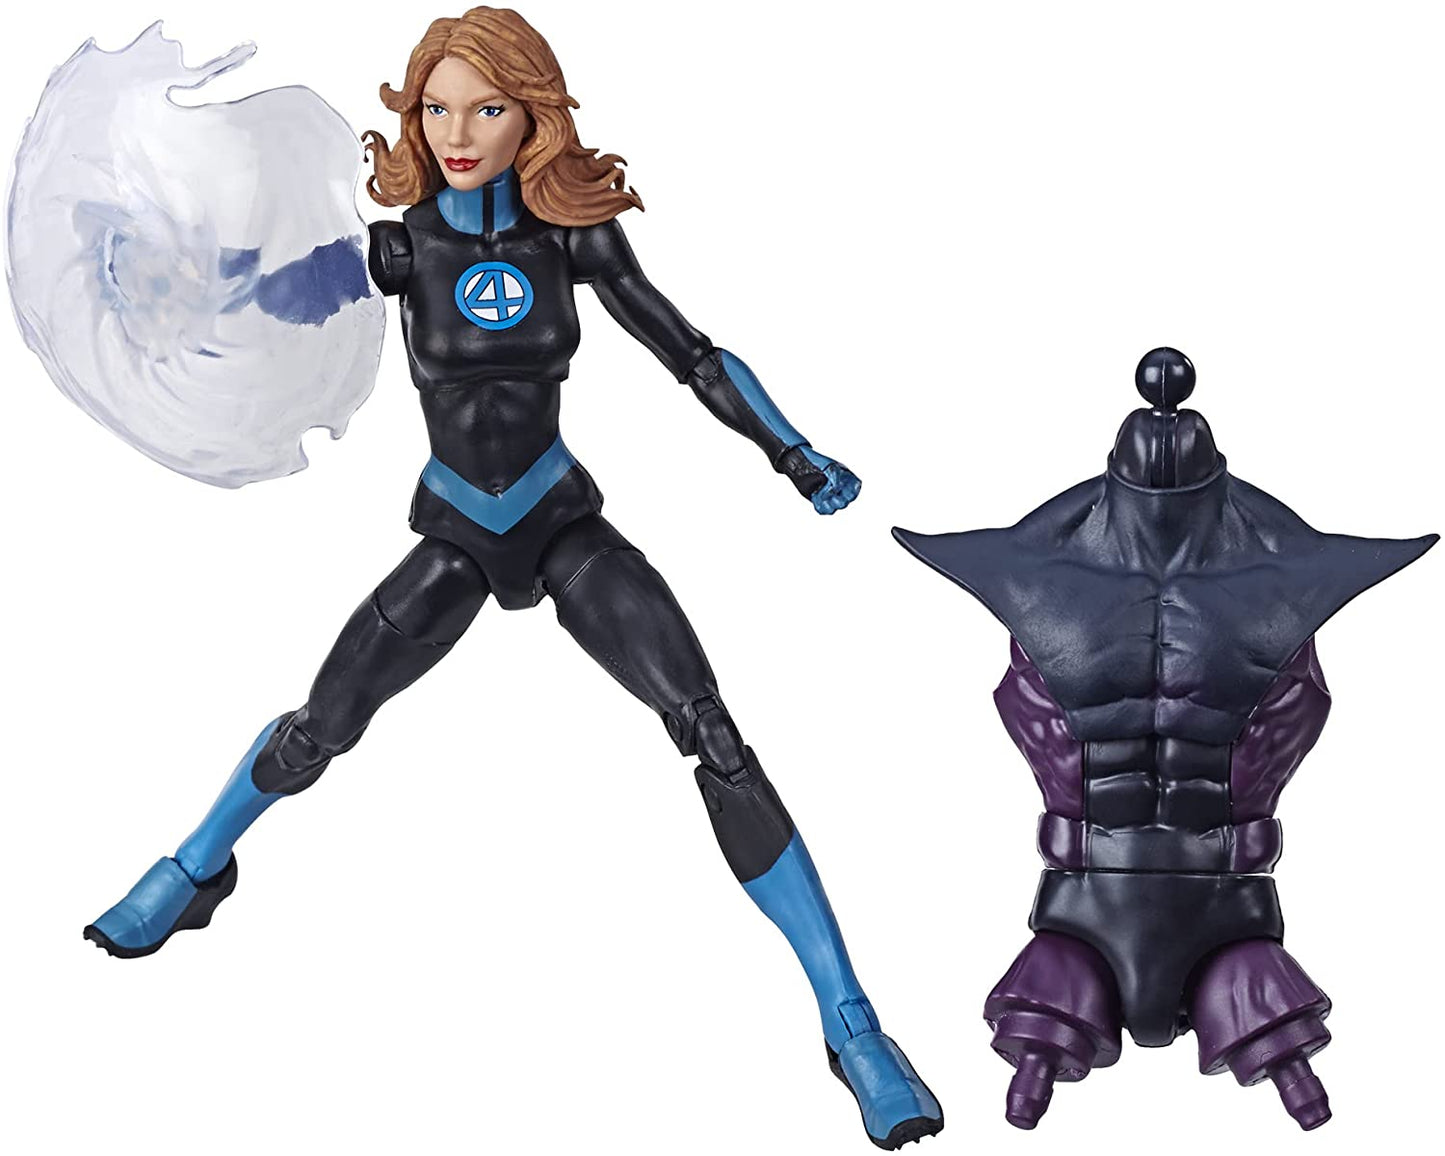 Marvel Legends Series Fantastic Four 6" Collectible Action Figure Marvel’s Invisible Woman Toy, 1 Accessory, 1 Build-A-Figure Part